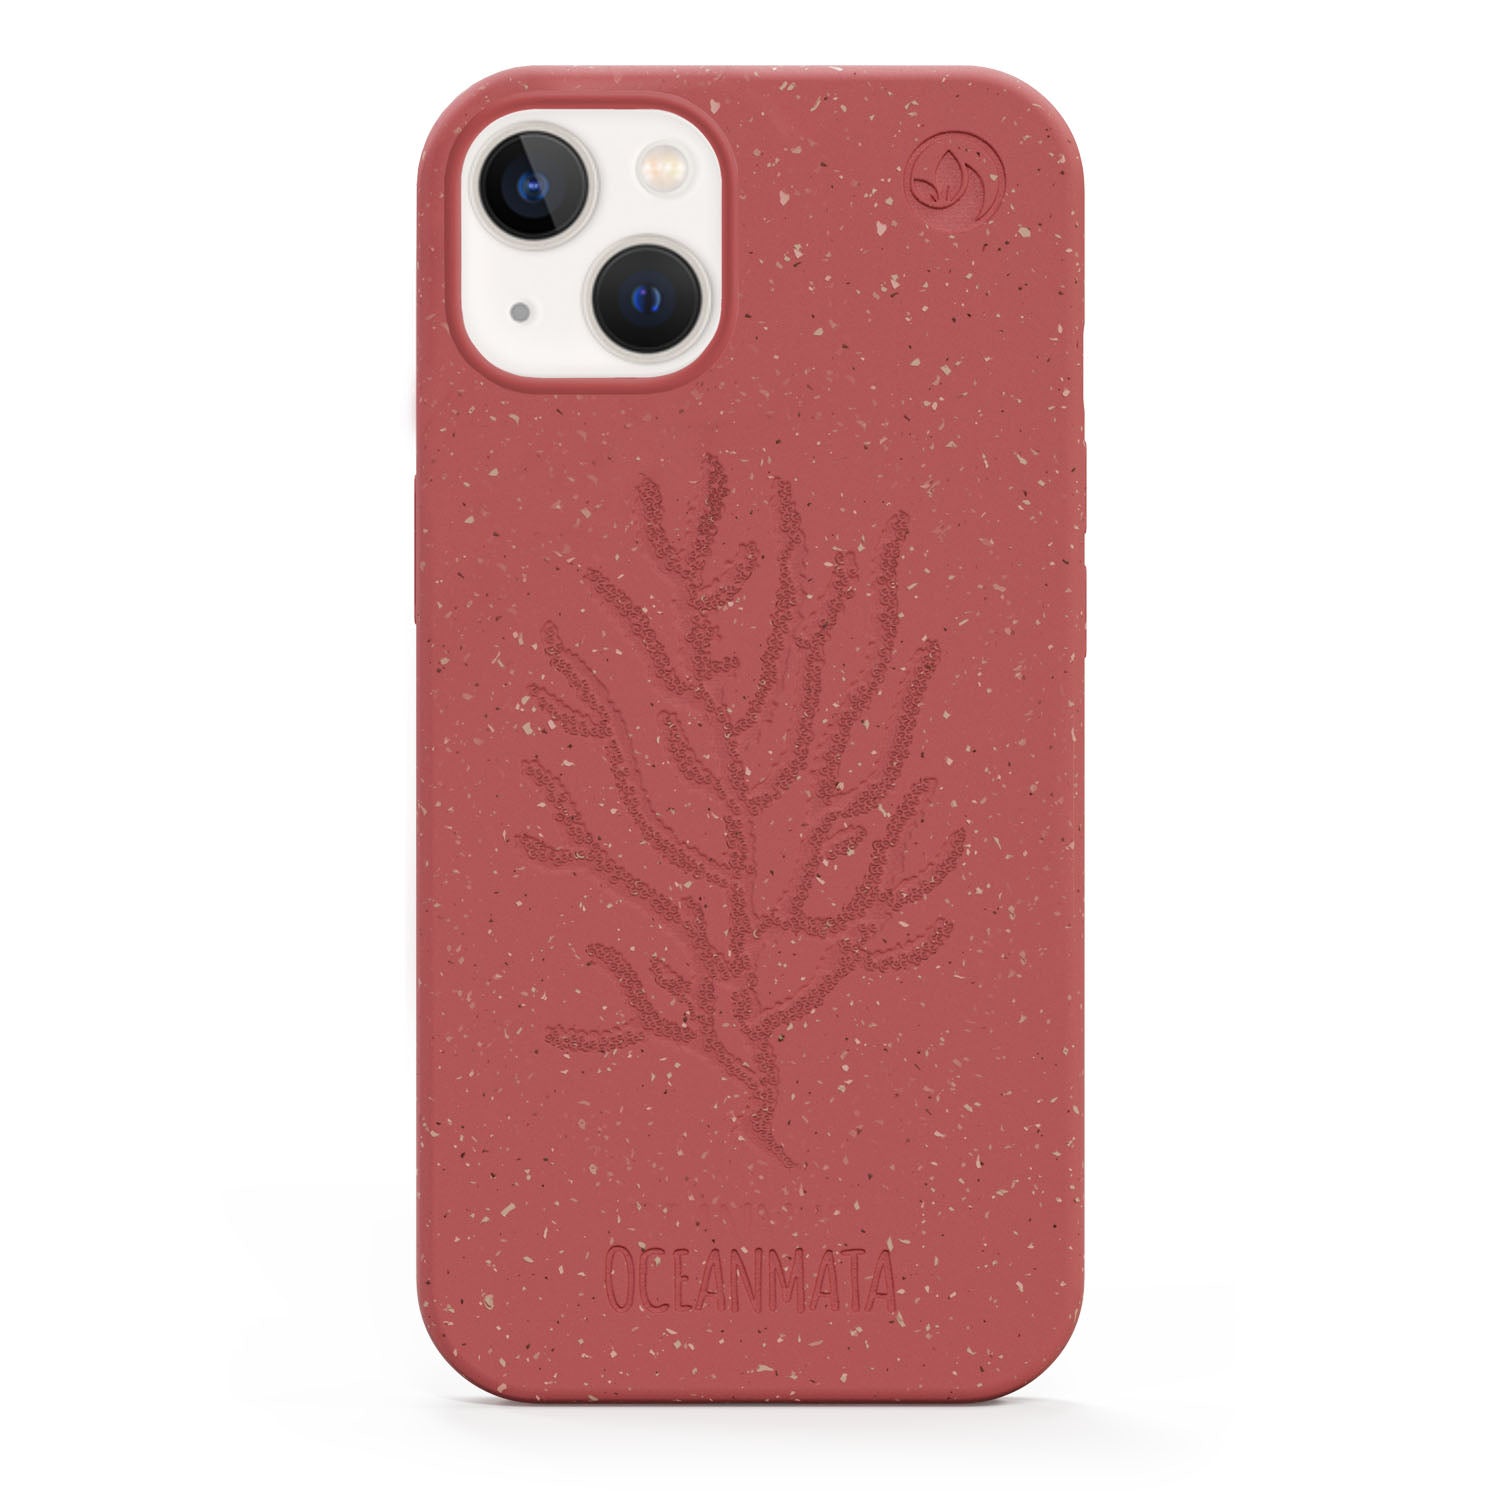 Organisch Apple iPhone hoesje "Coral Edition" by Oceanmata®